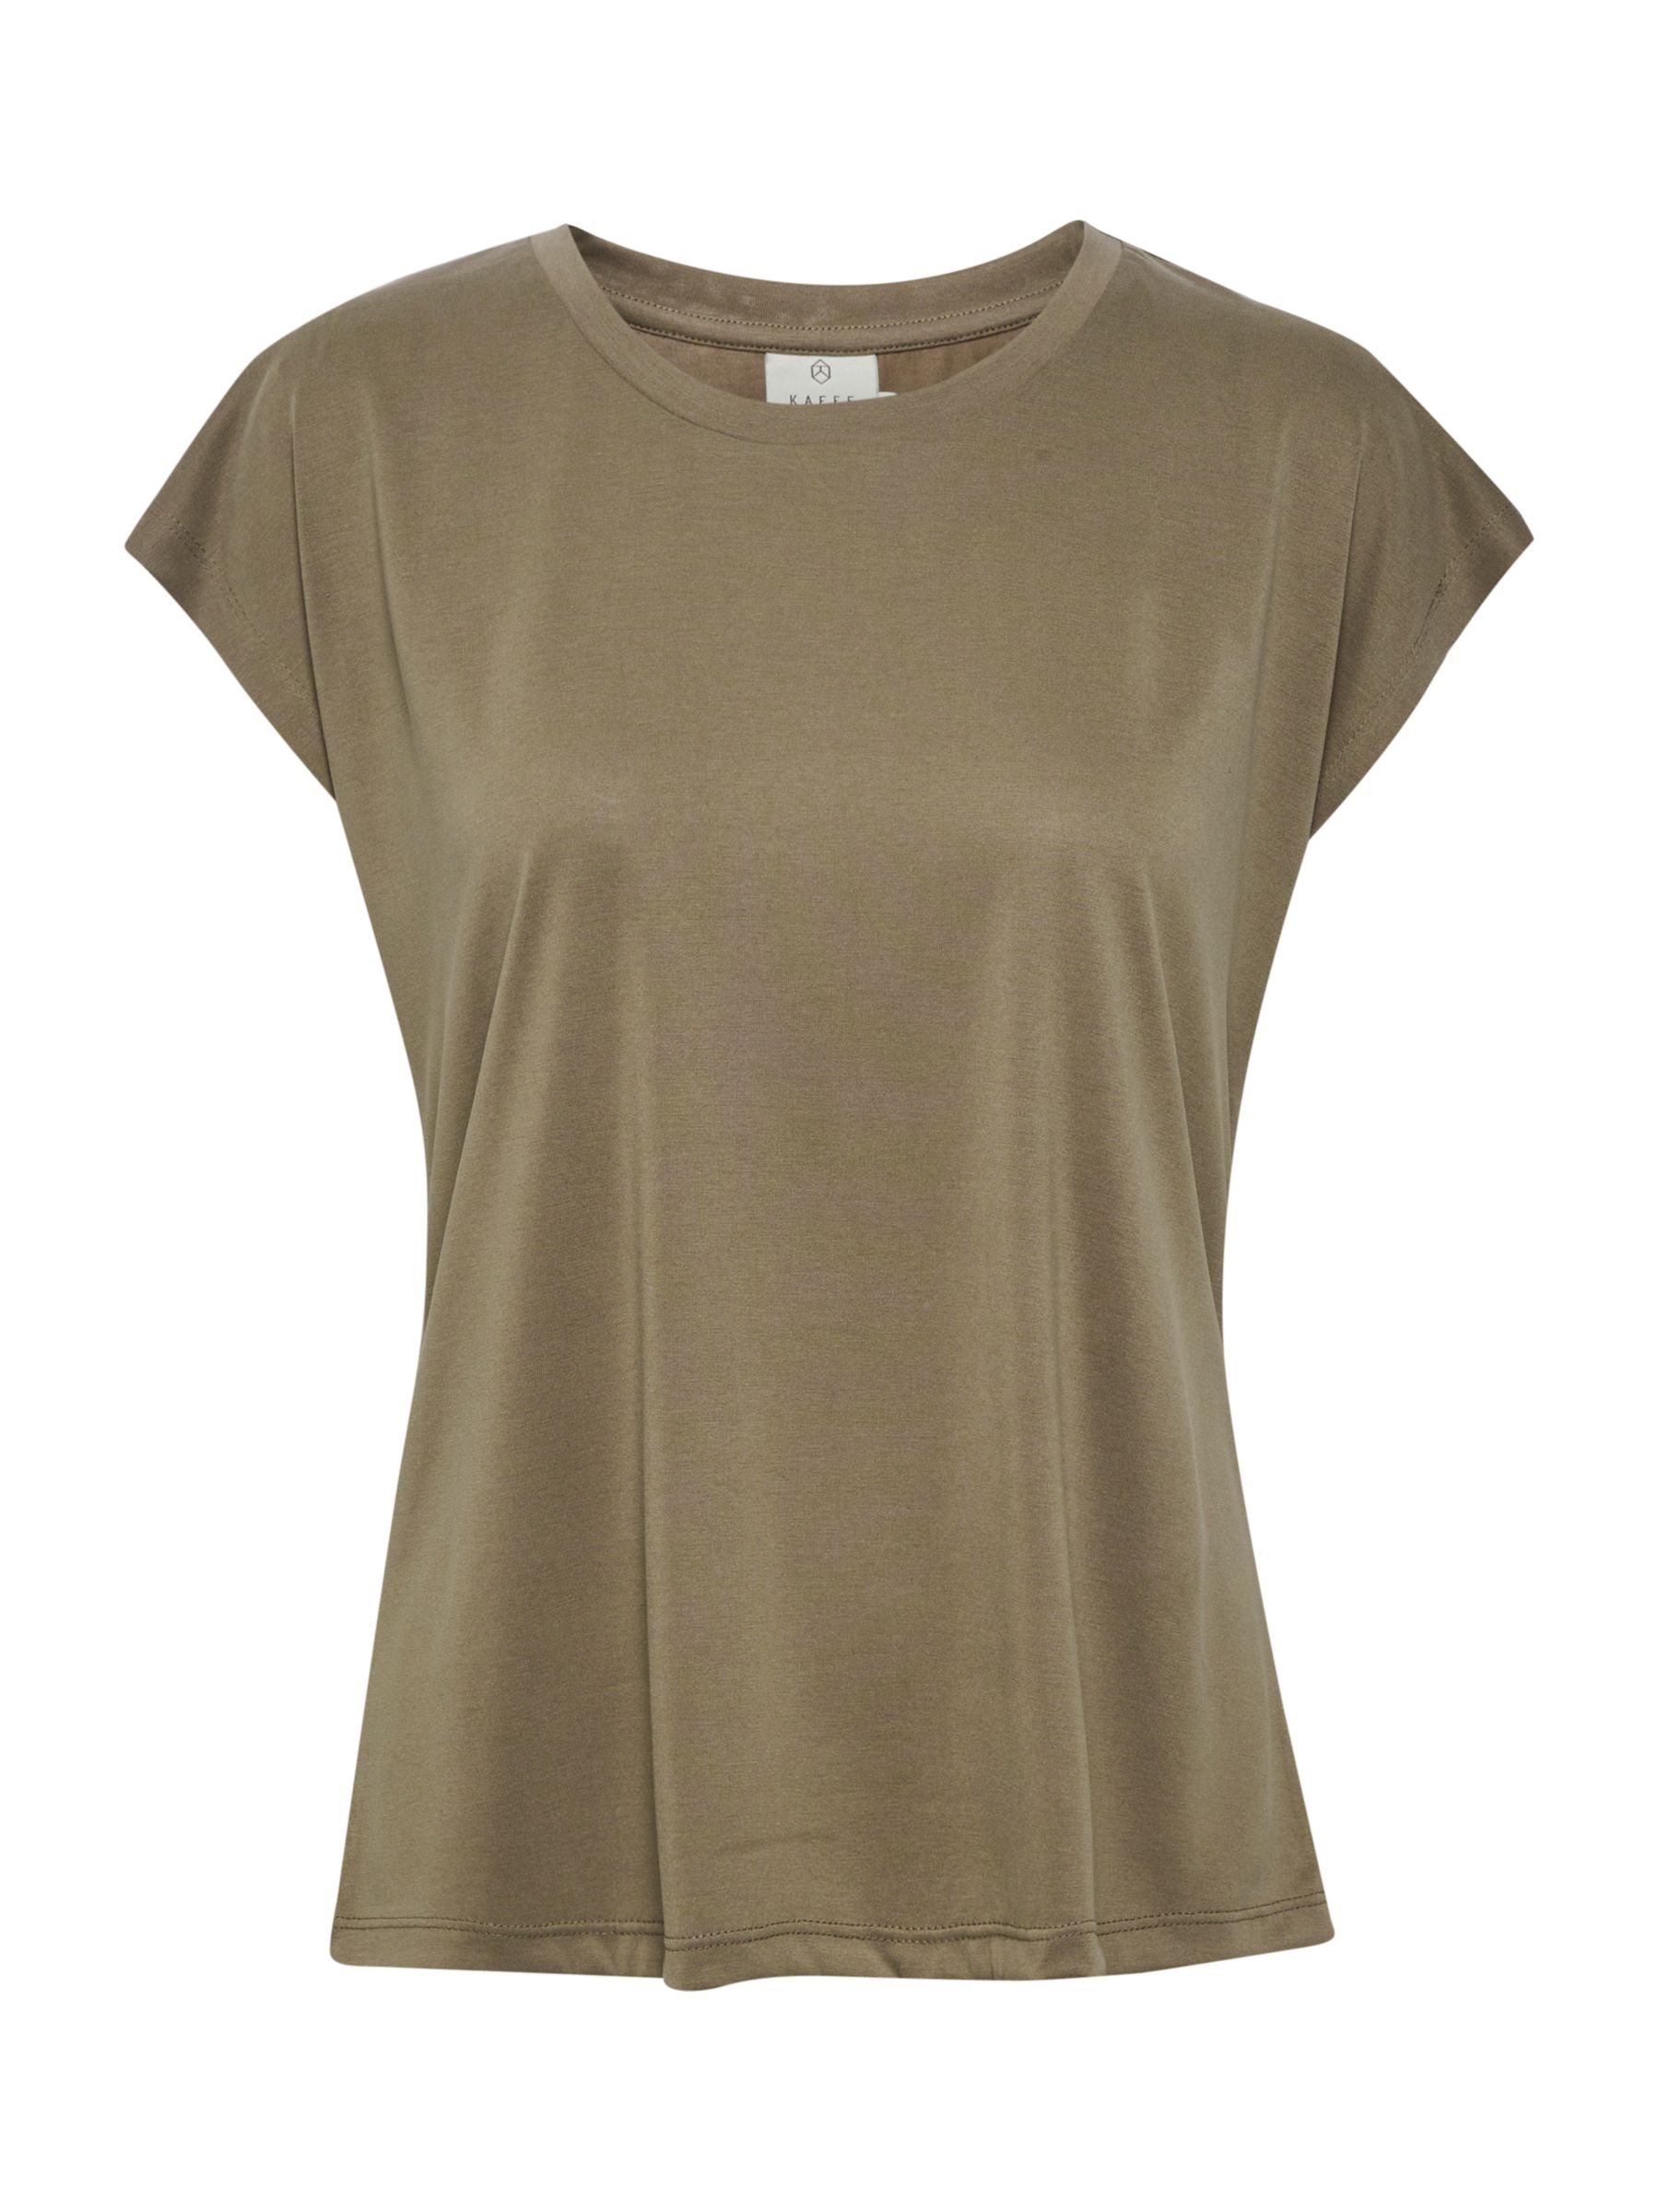 Buy KAFFE Lise Marie Cap Sleeve T-Shirt, Taupe Brown Online at johnlewis.com